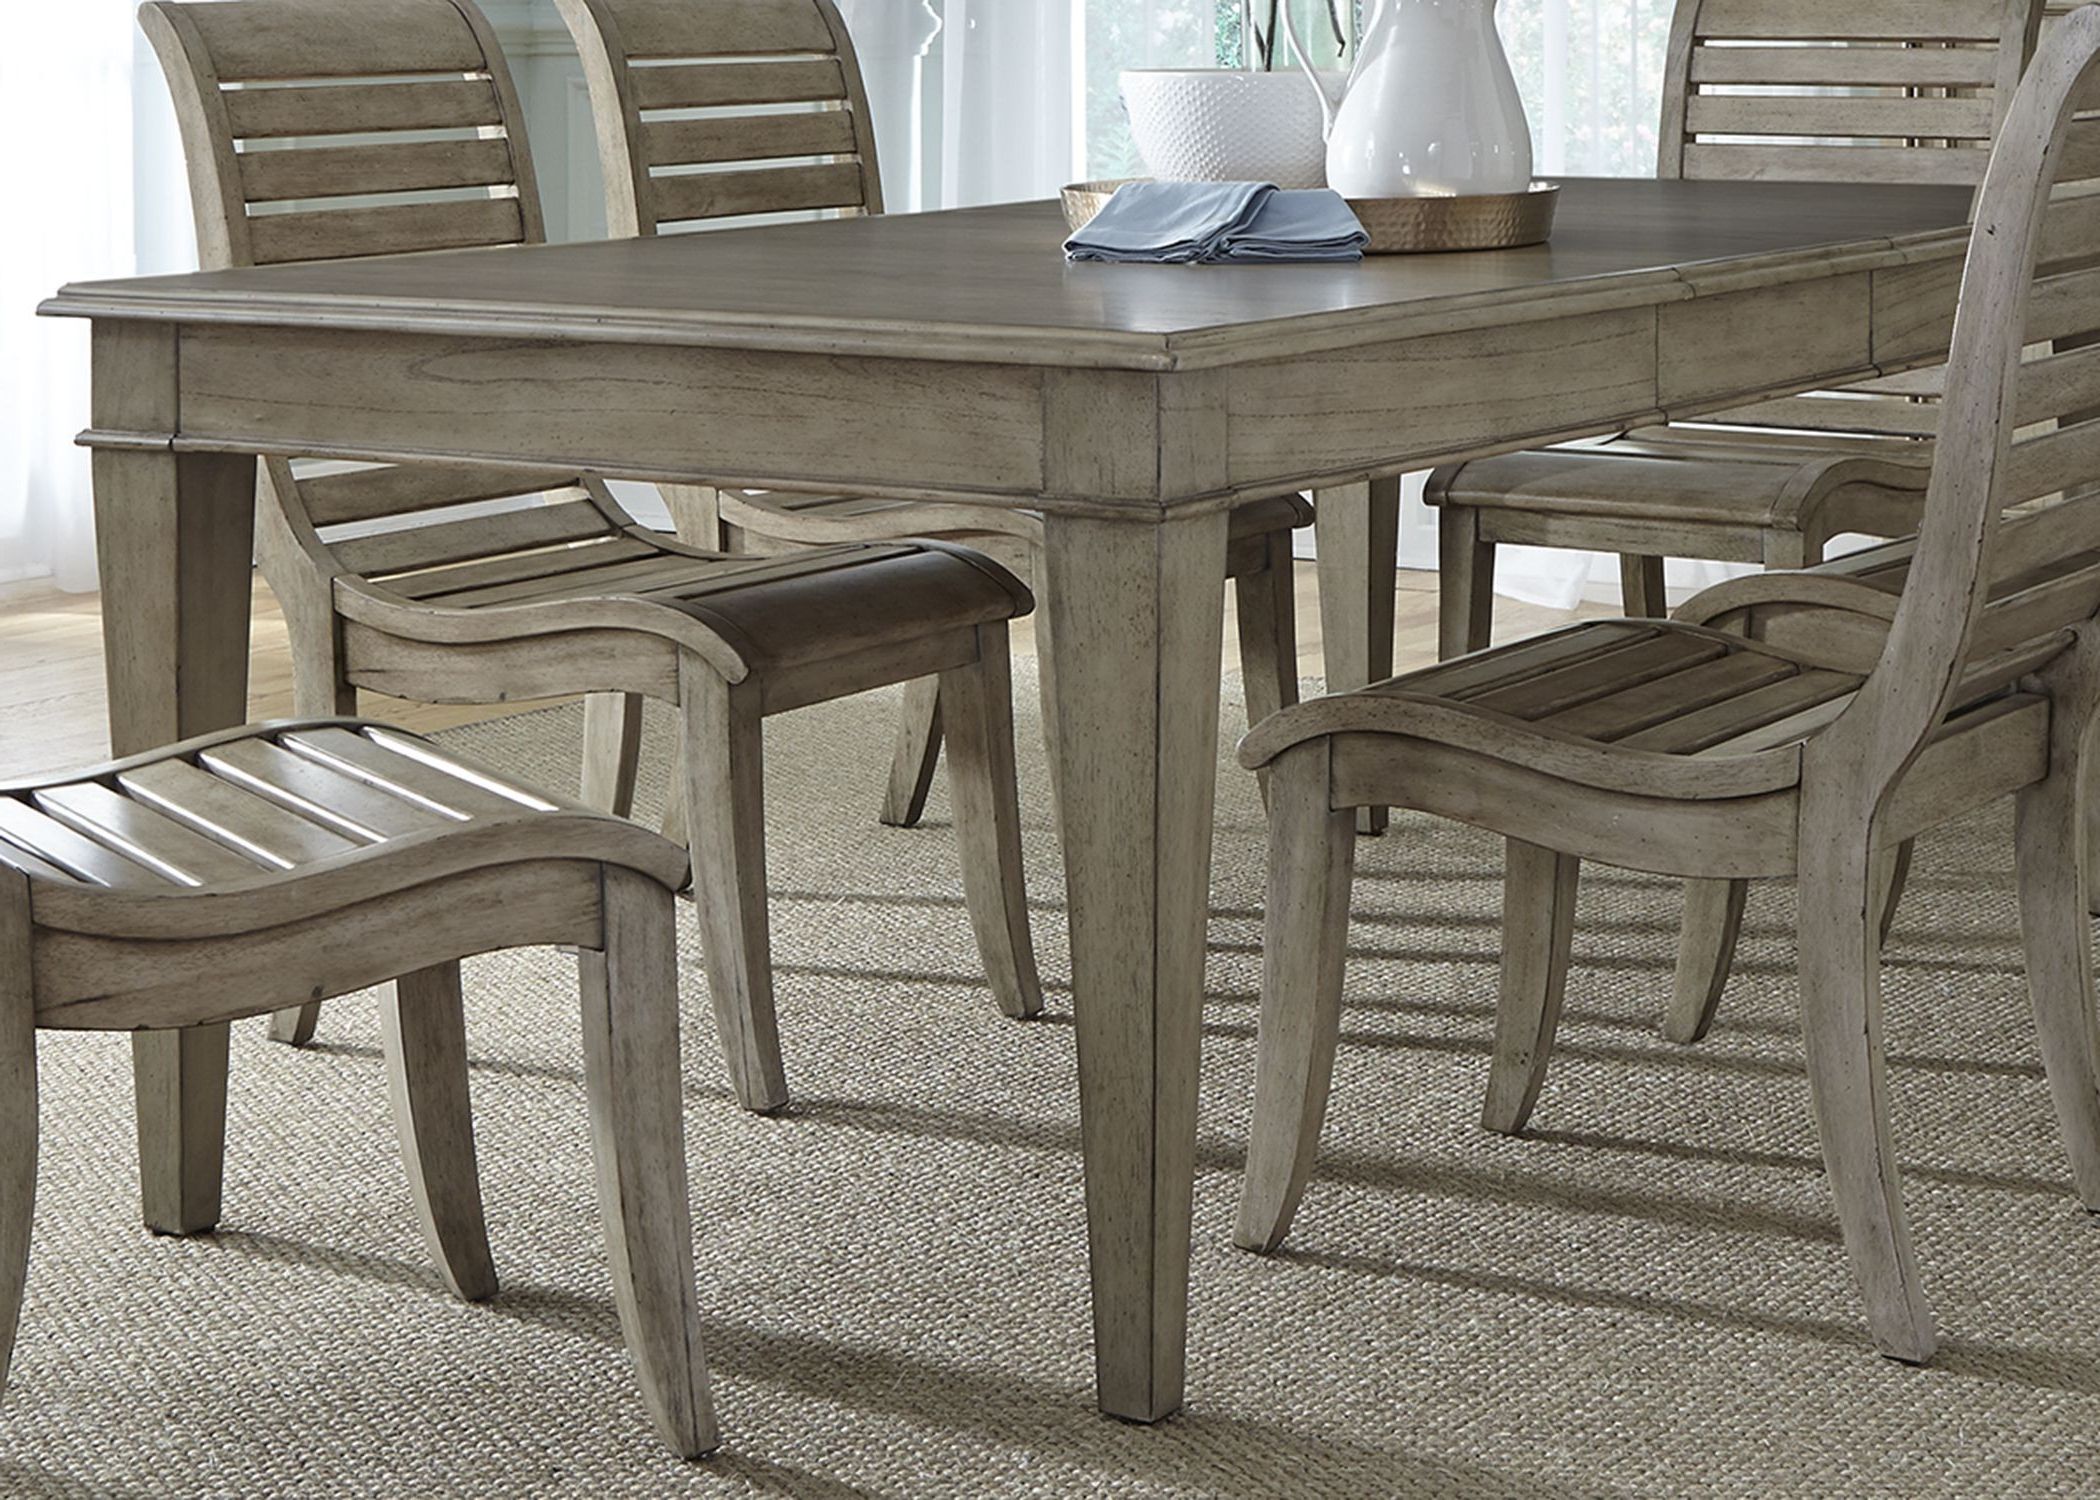 Grayton Grove Driftwood Extendable Rectangular Leg Dining Within Well Liked Natural Rectangle Dining Tables (View 11 of 20)